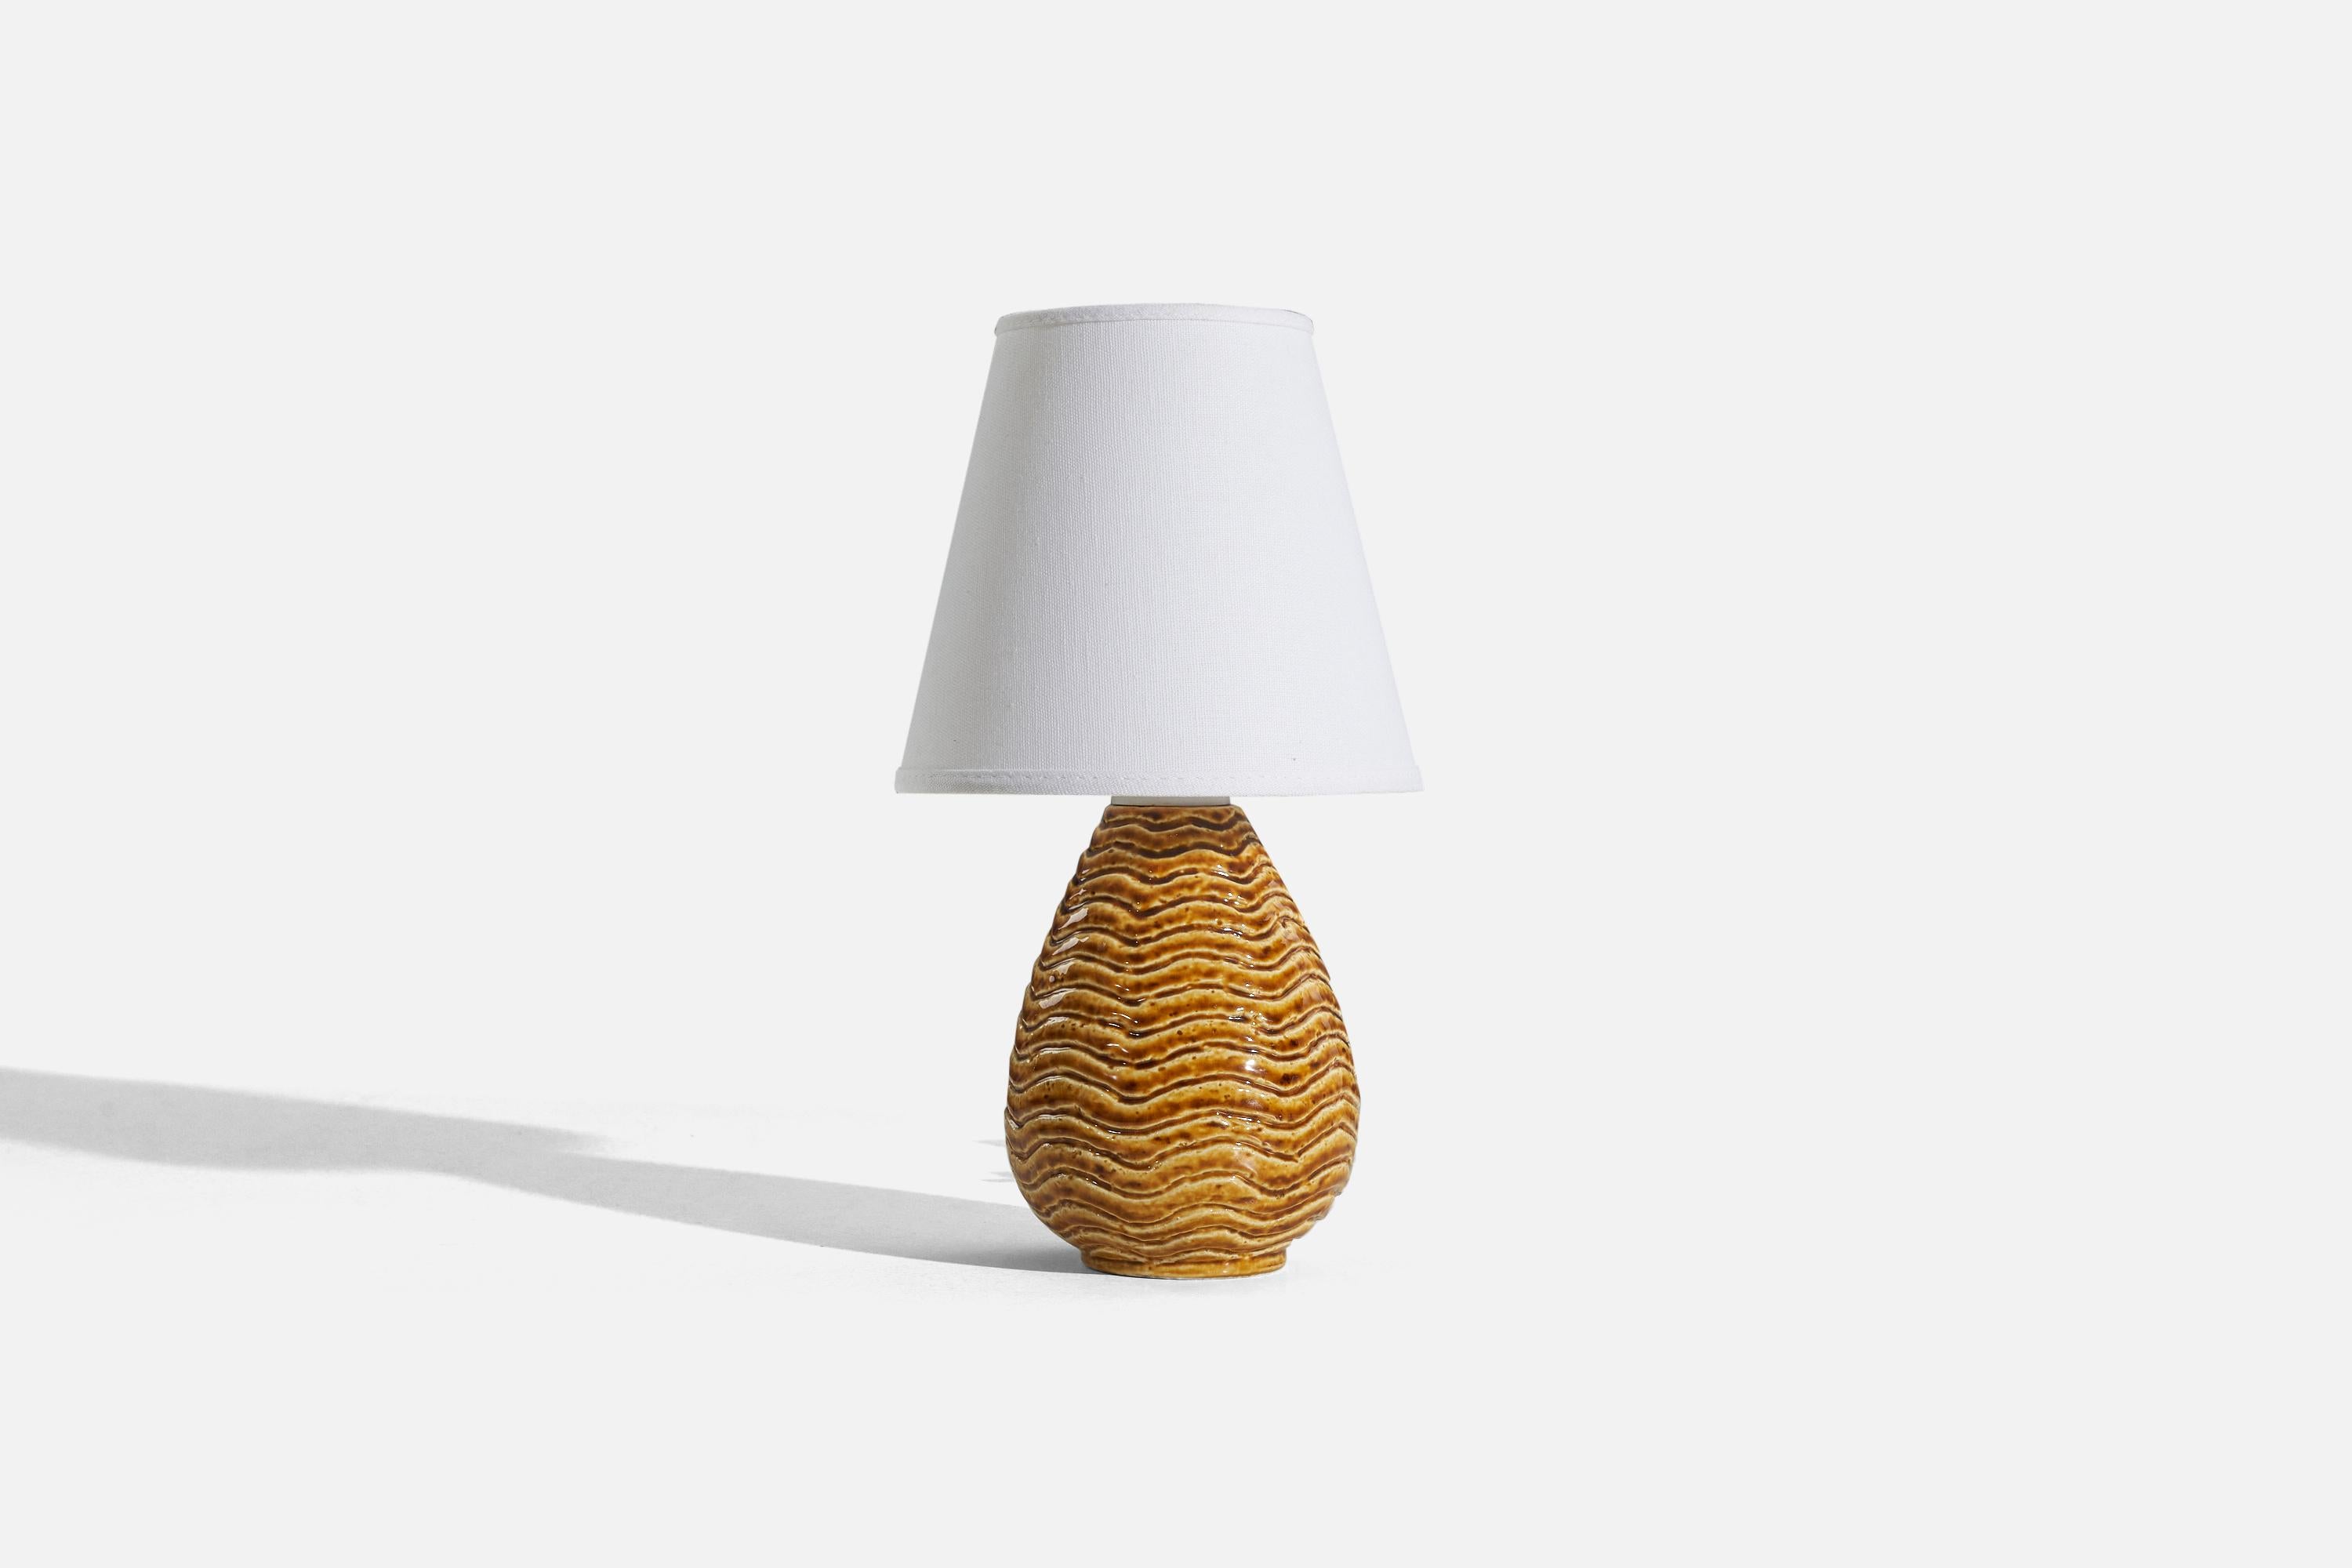 An orange, glazed stoneware table lamp designed by Gunnar Nylund and produced by Rörstrand, Sweden, 1940s. 

Sold without lampshade. 
Dimensions of Lamp (inches) : 8.5 x 5.625 x 5.625 (H x W x D)
Dimensions of Shade (inches) : 4.0625 x 6.75 x